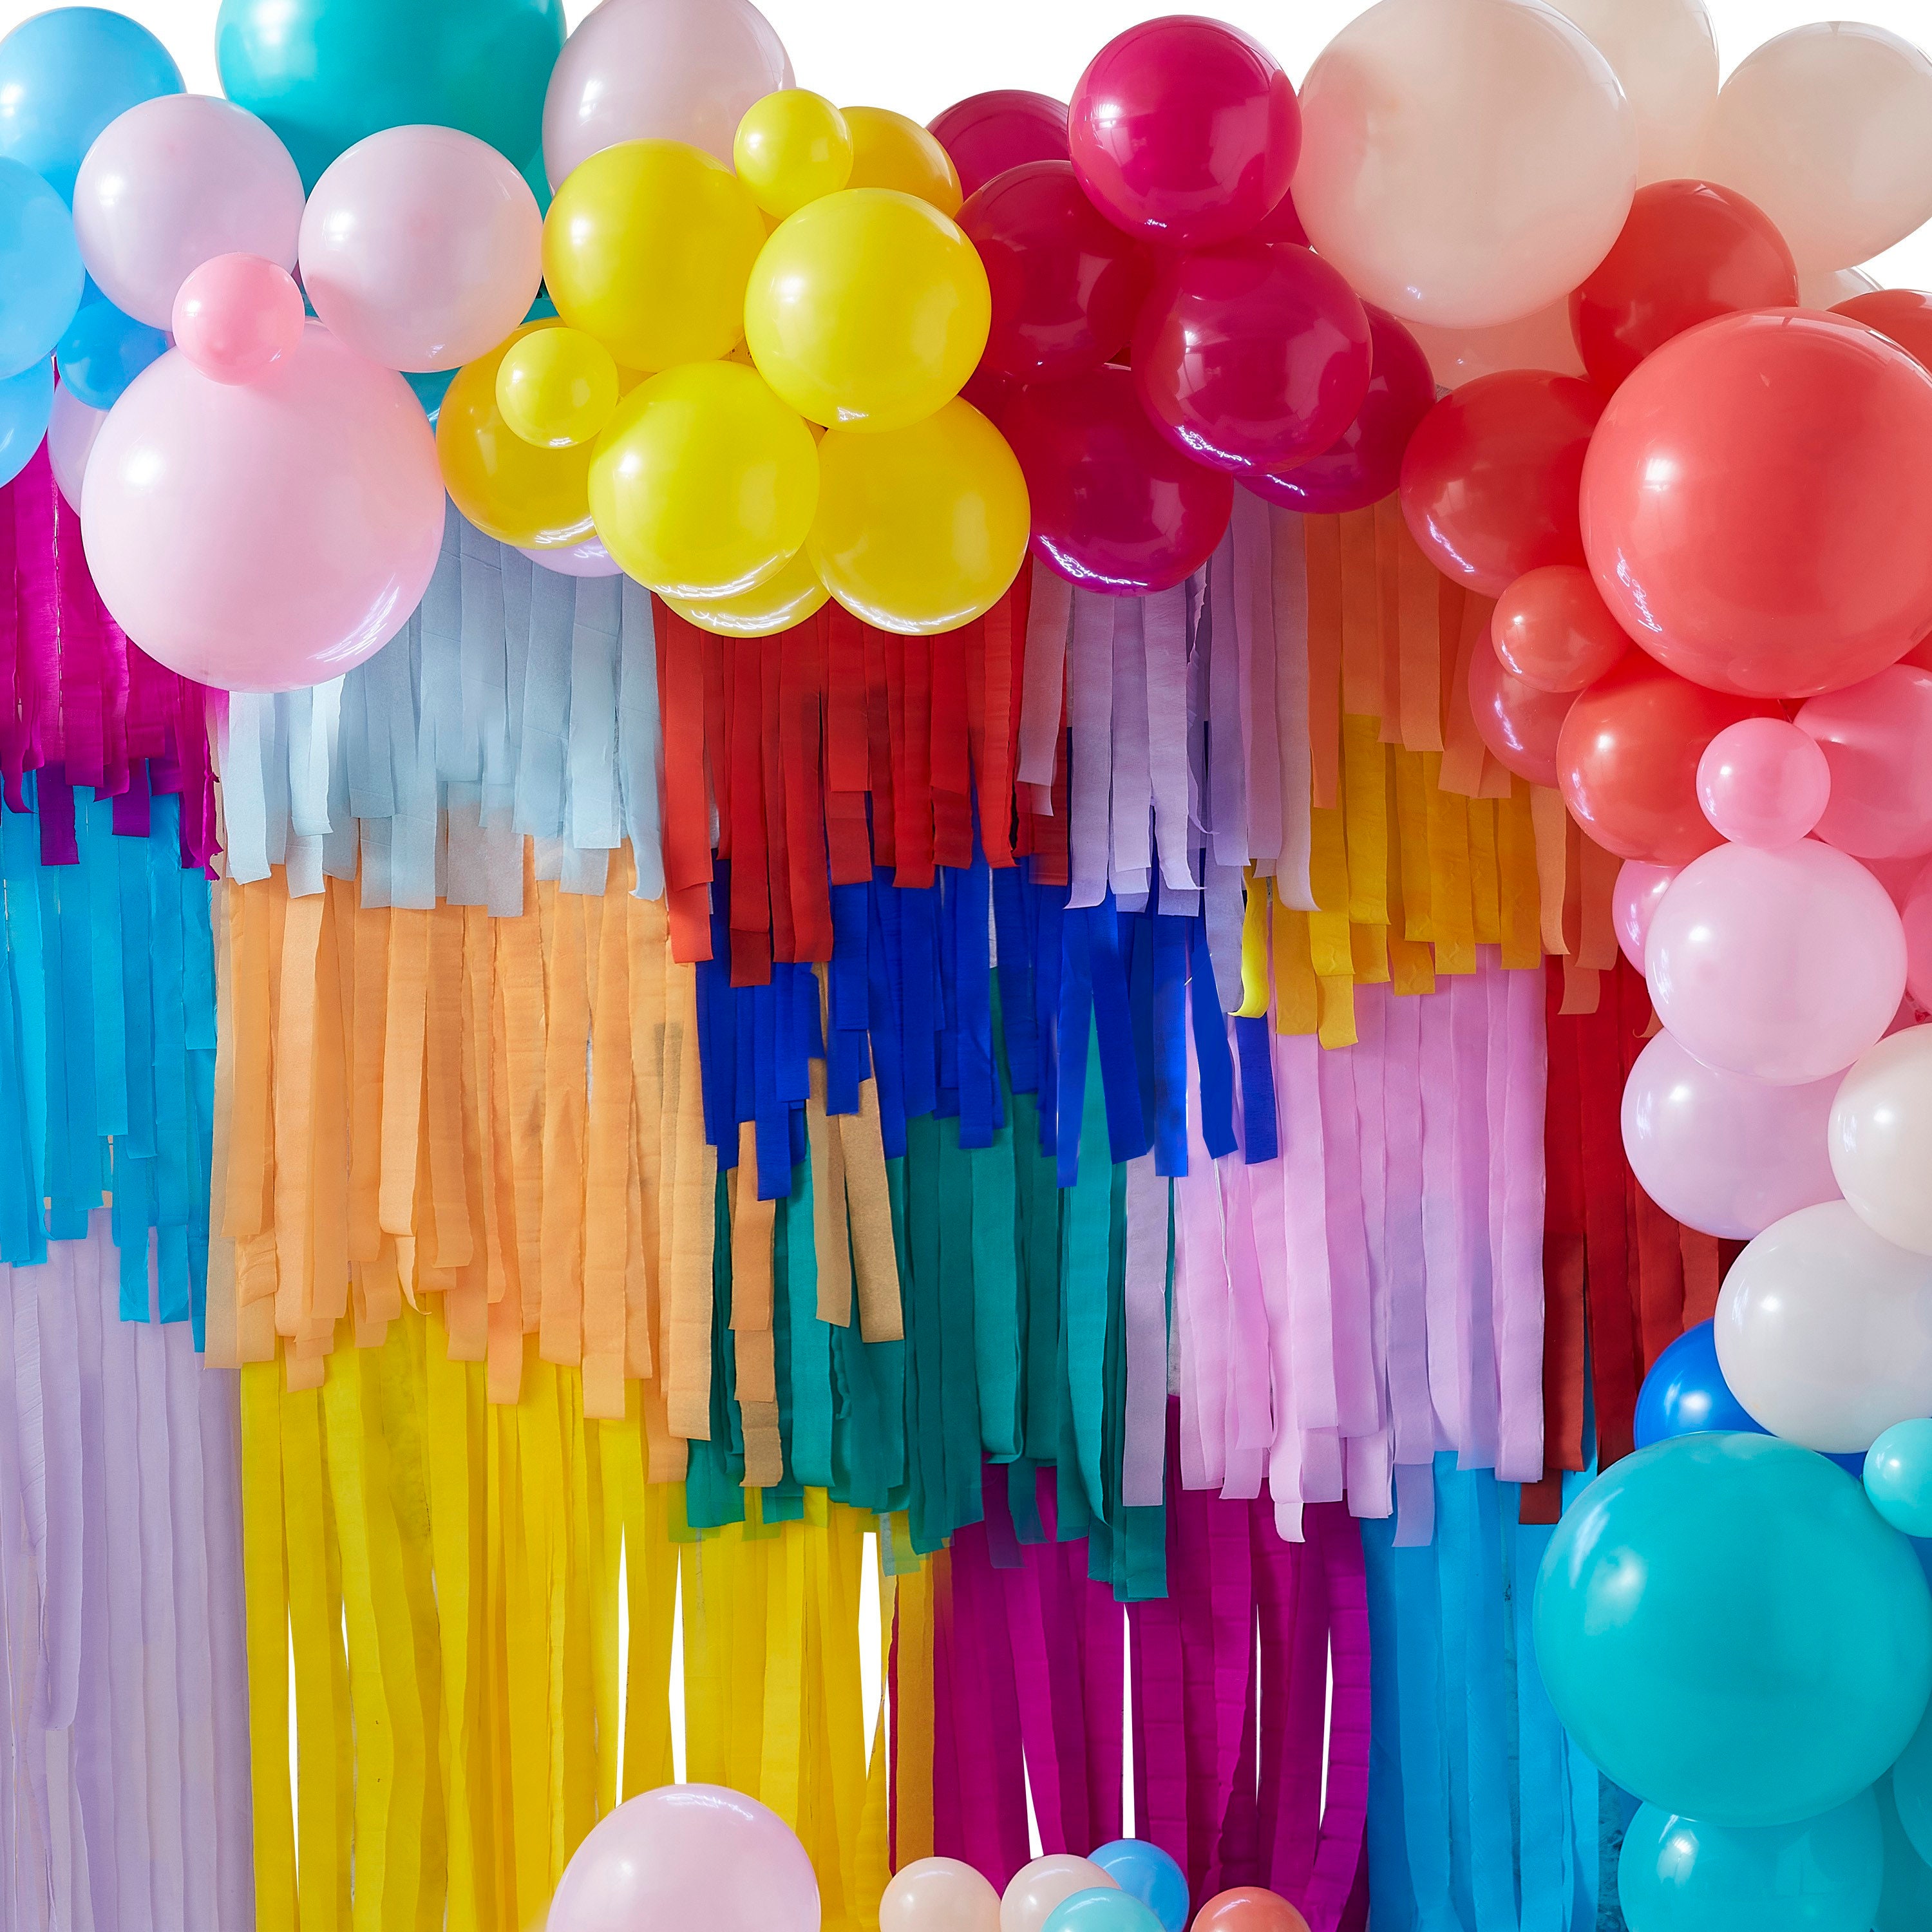 90 Balloons (12 Inch) + 6 Rolls Party Streamers (81 ft each) - Emerald Green  and Ivory - Helium Quality Latex Balloons and Crepe Paper Streamers Colored Party  Decorations